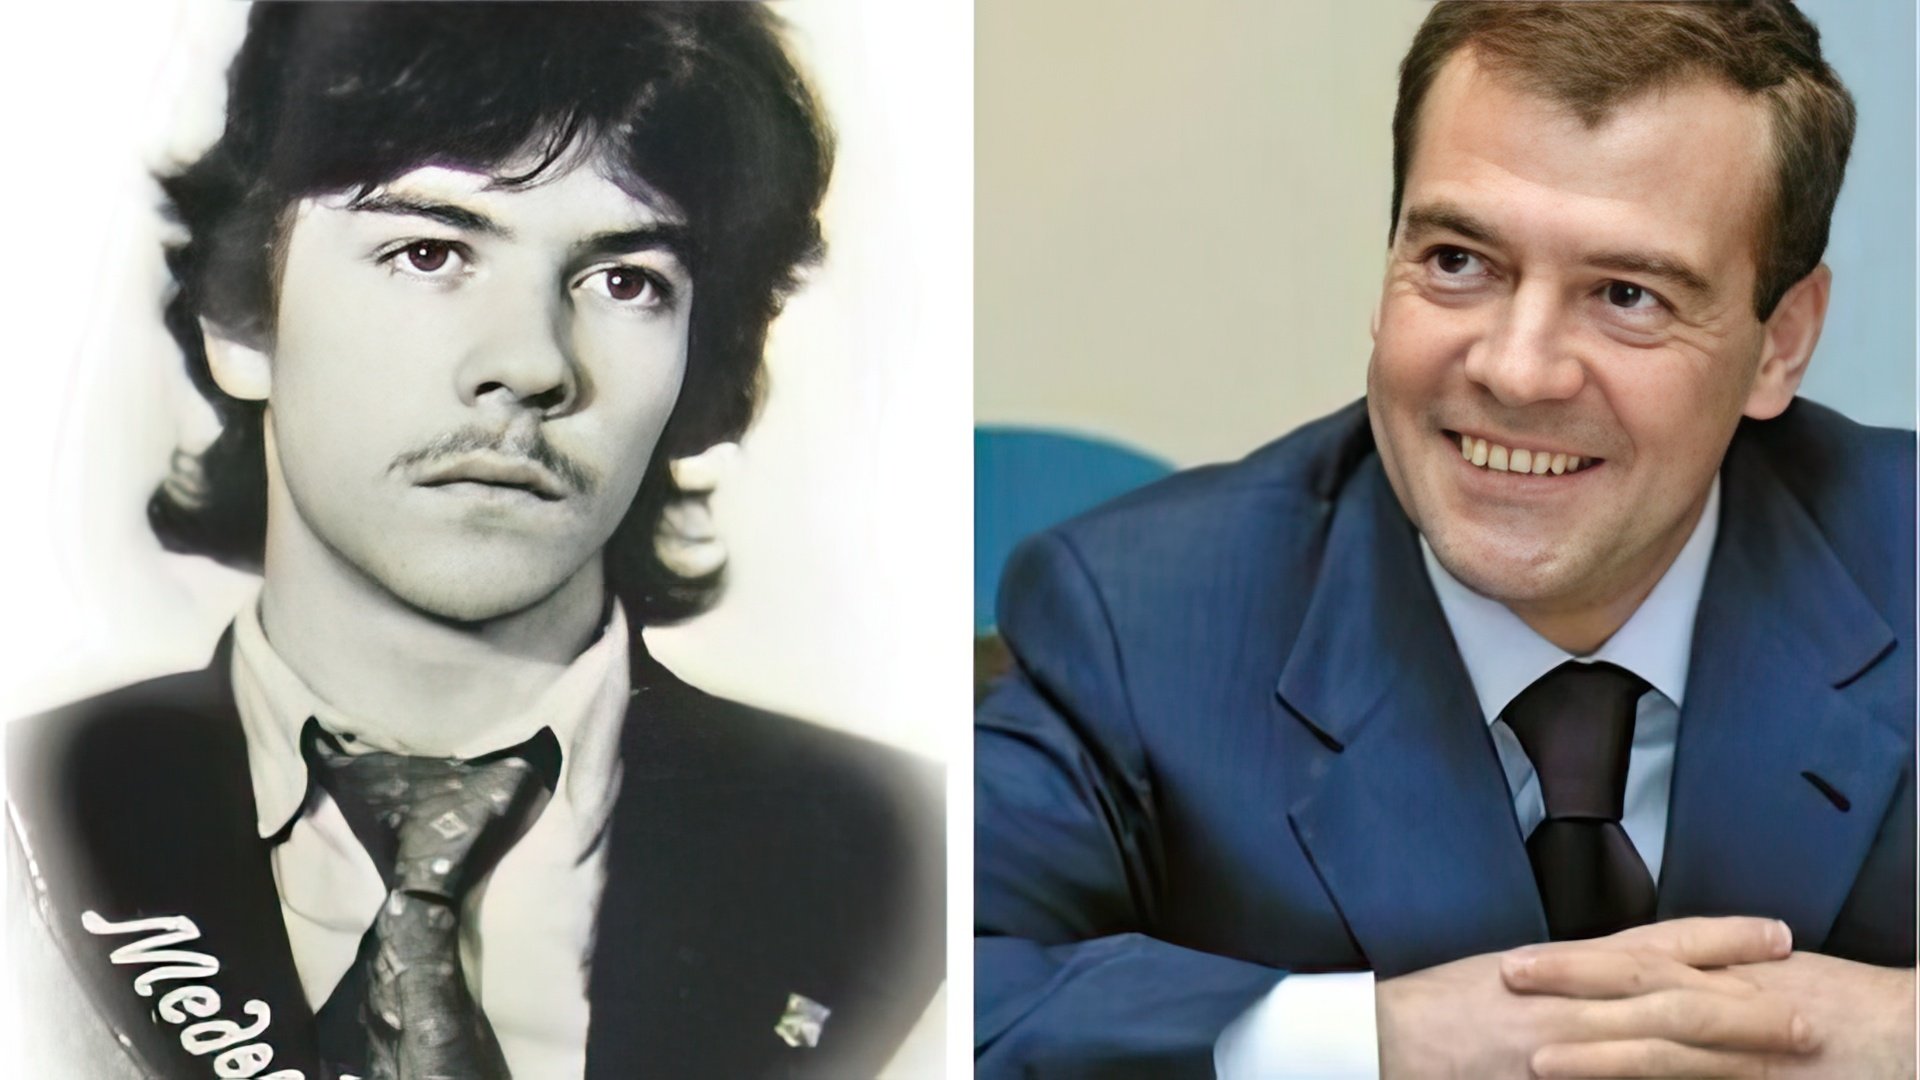 Dmitry Medvedev in his youth and now